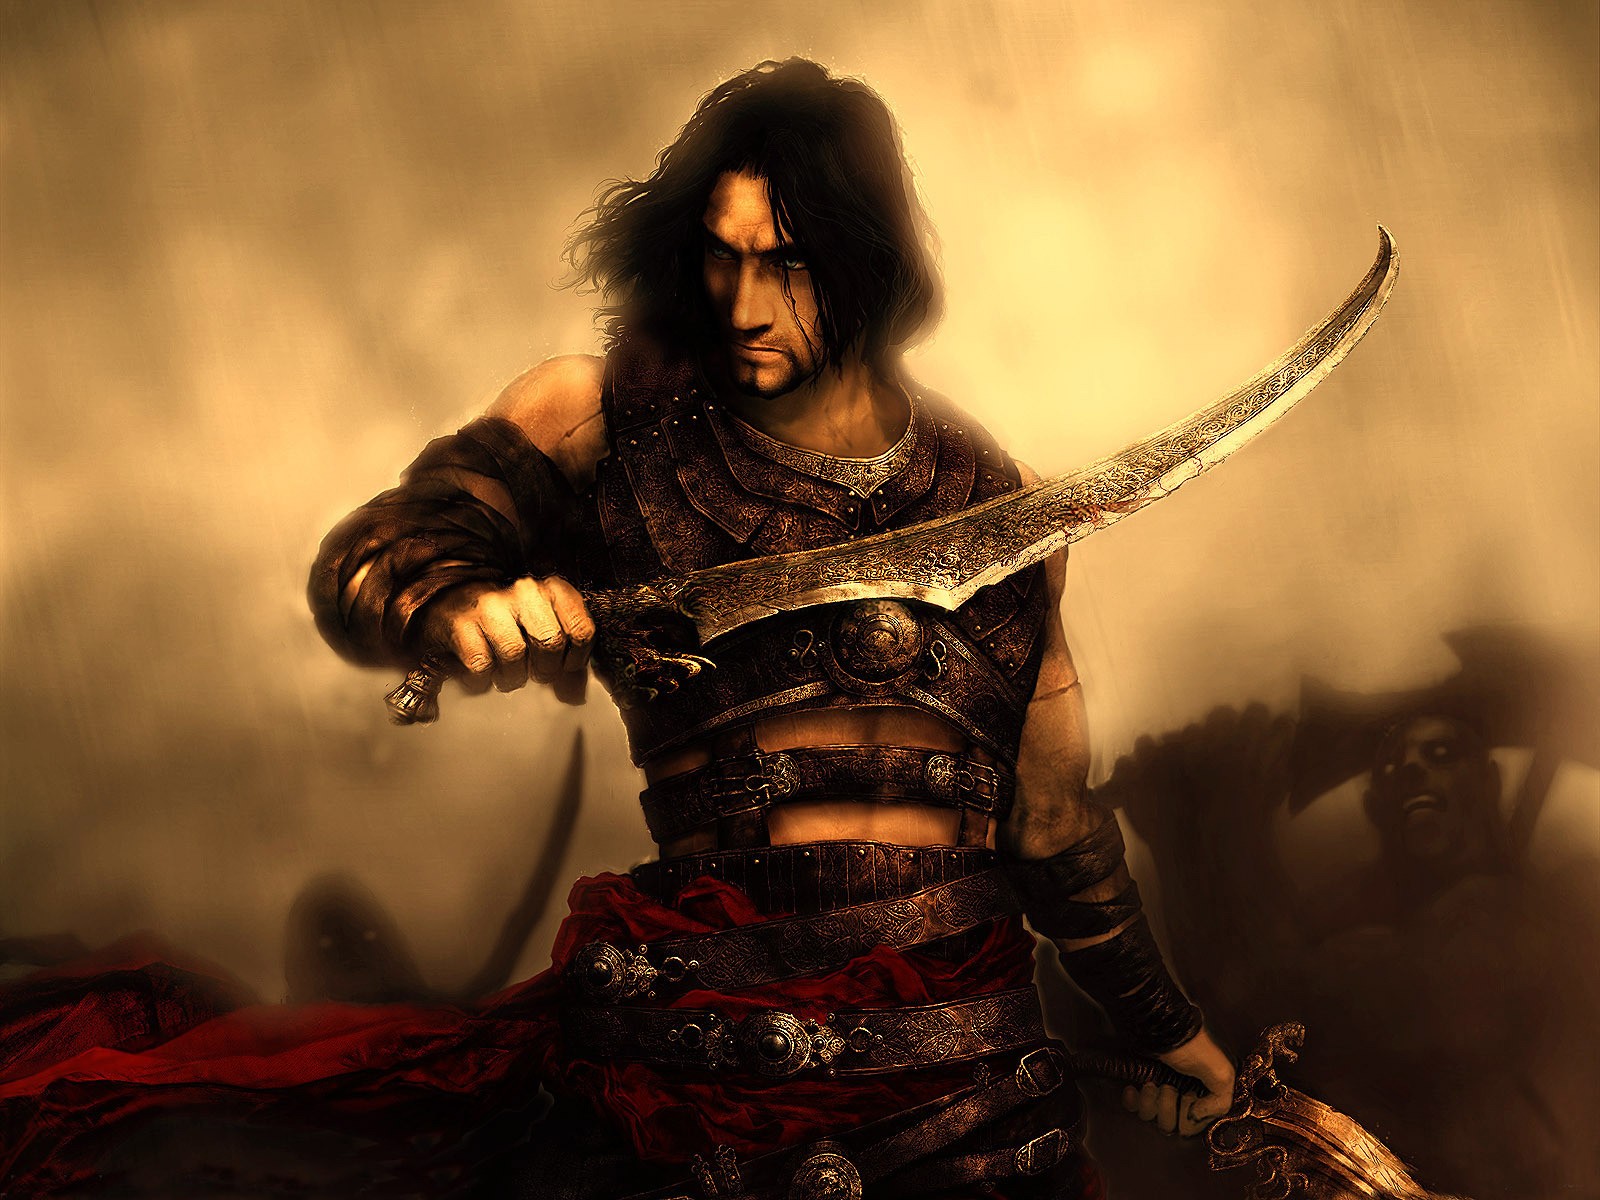 prince of persia, dark, video game, prince of persia: warrior within, war